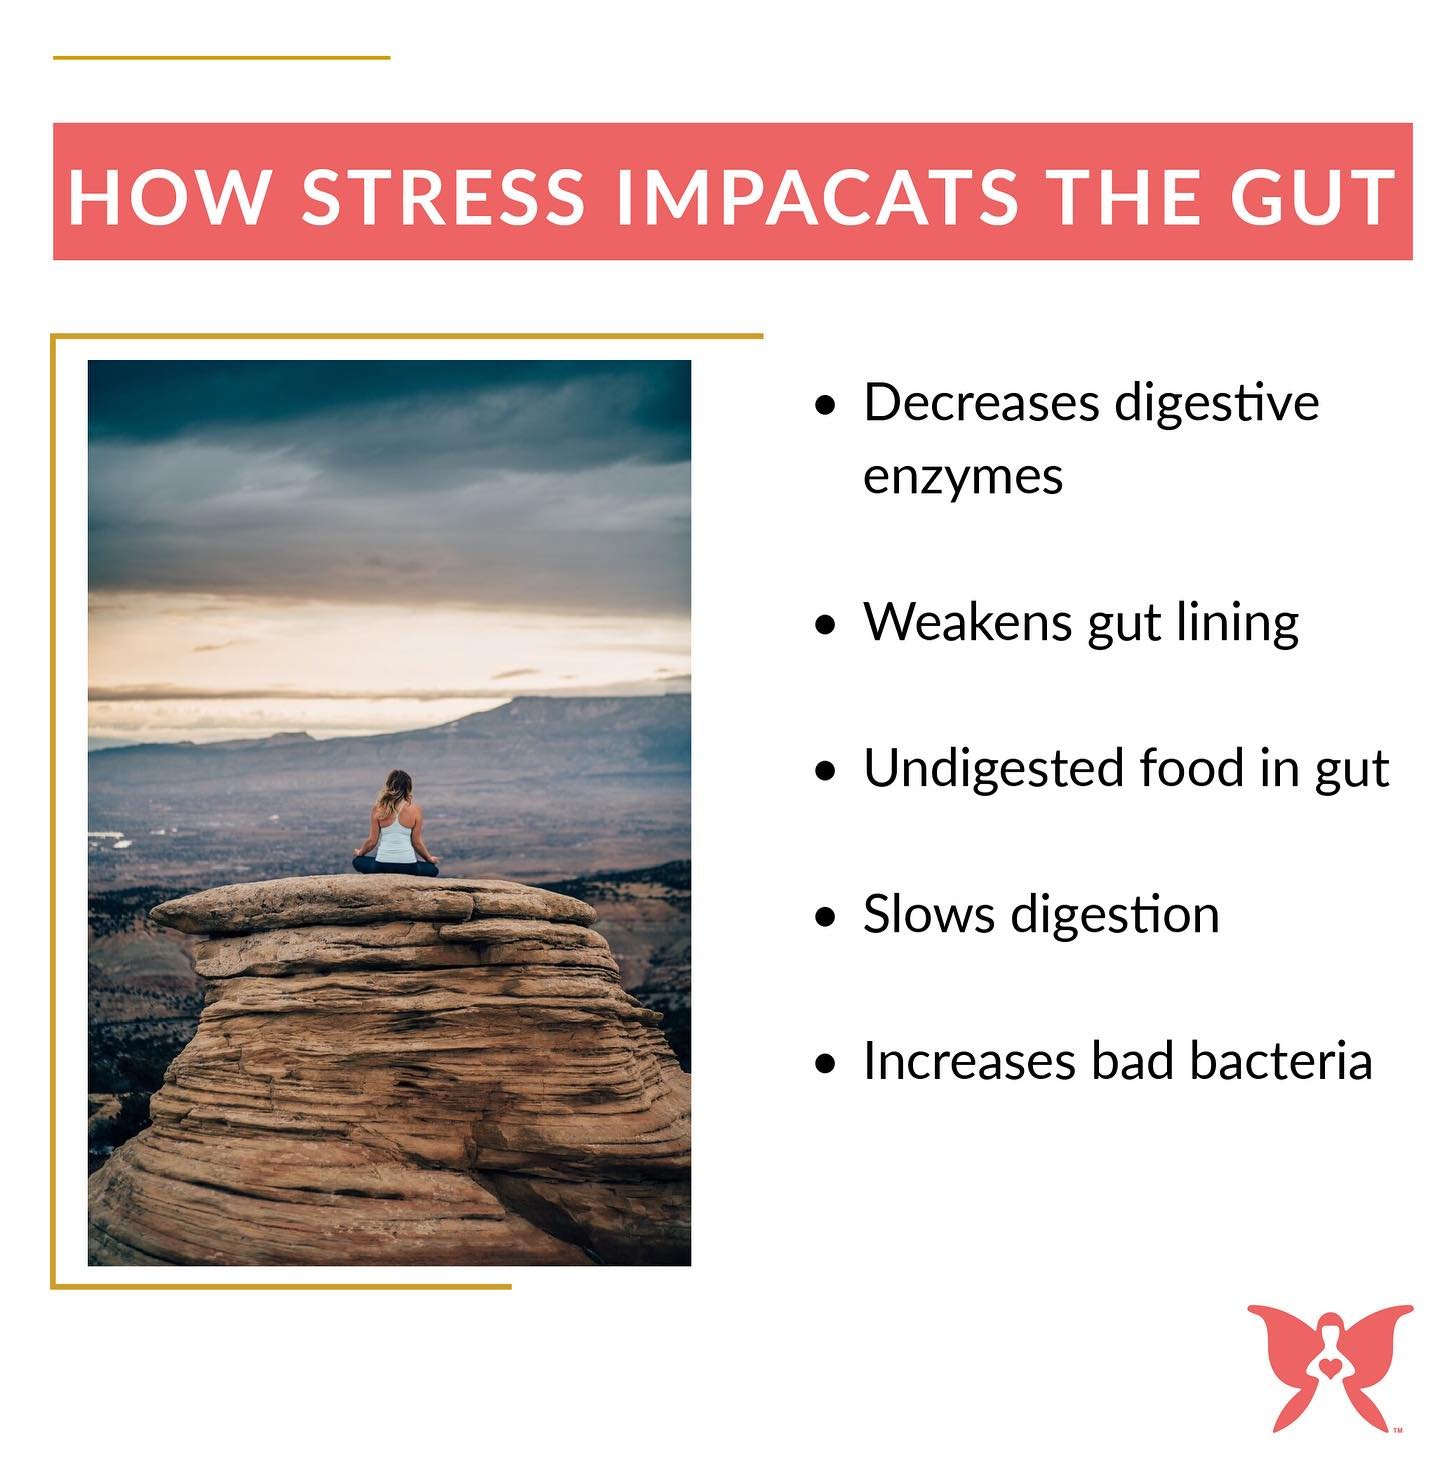 Clinical research states that stress can be more damaging to the gut than junk food! When working with clients, I often analyze a snapshot of their microbiome, and I will see clients with great diets but a compromised gut, and one of the most common 